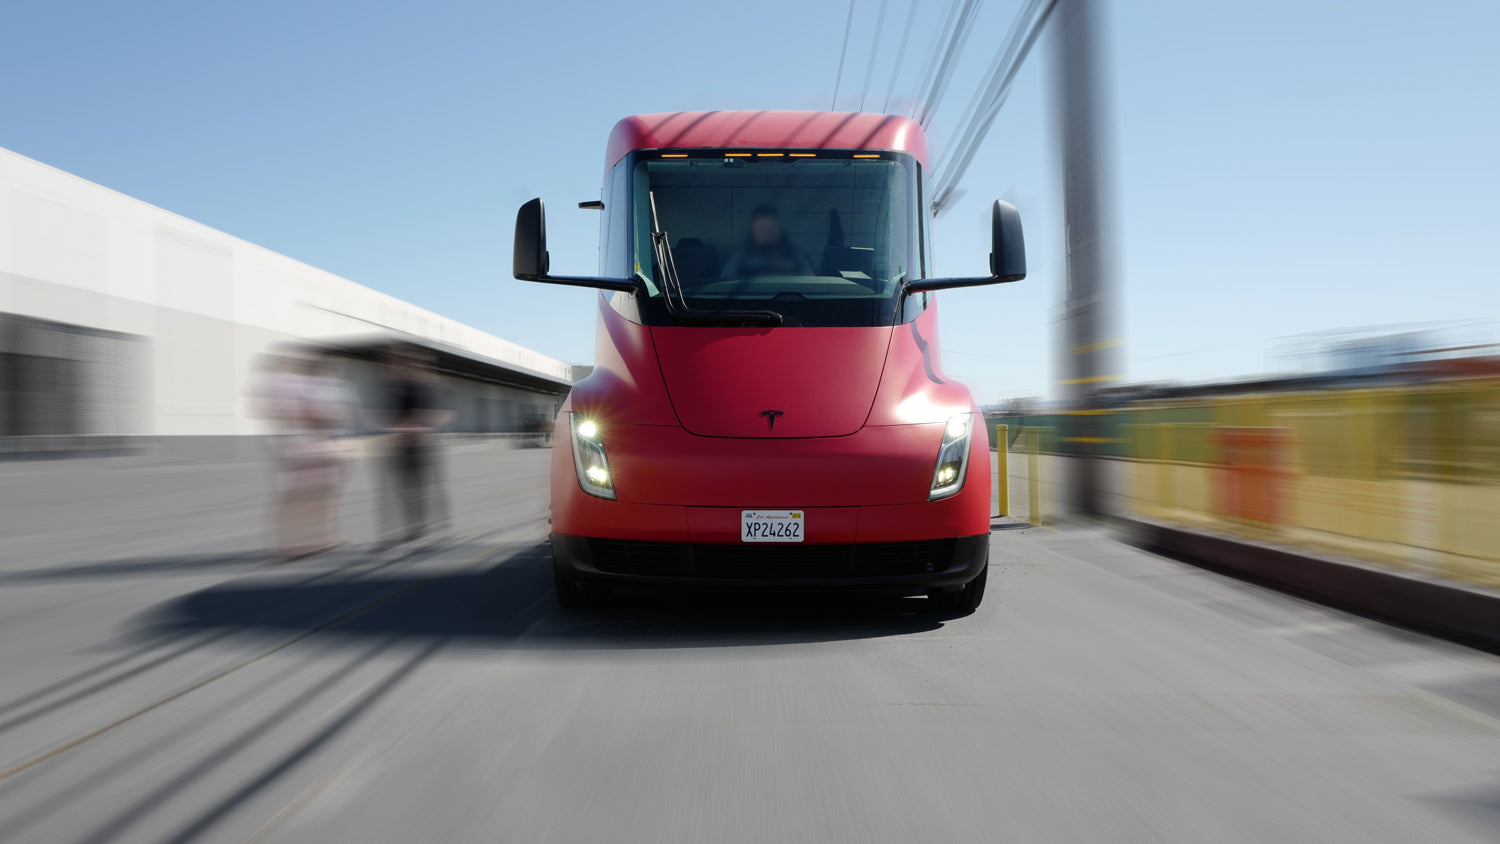 Exploring in the Tesla Semi would be amazing